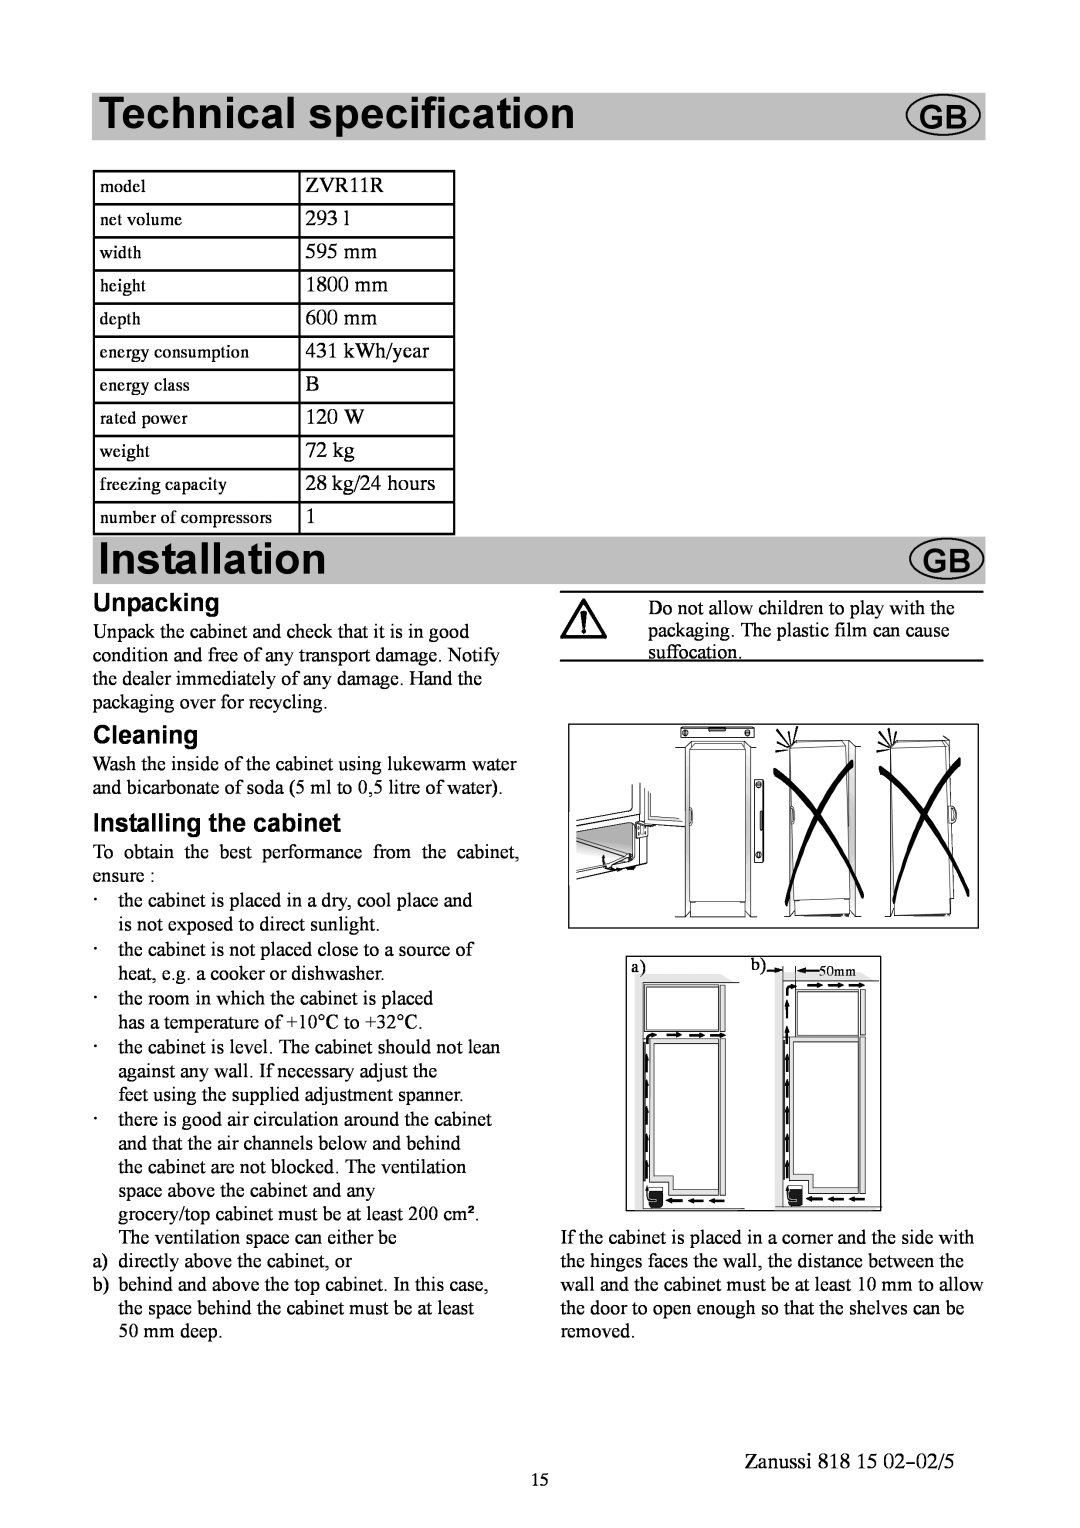 Zanussi ZVR11R manual Technical specification, Installation, Gb Gb, Unpacking, Cleaning, Installing the cabinet 